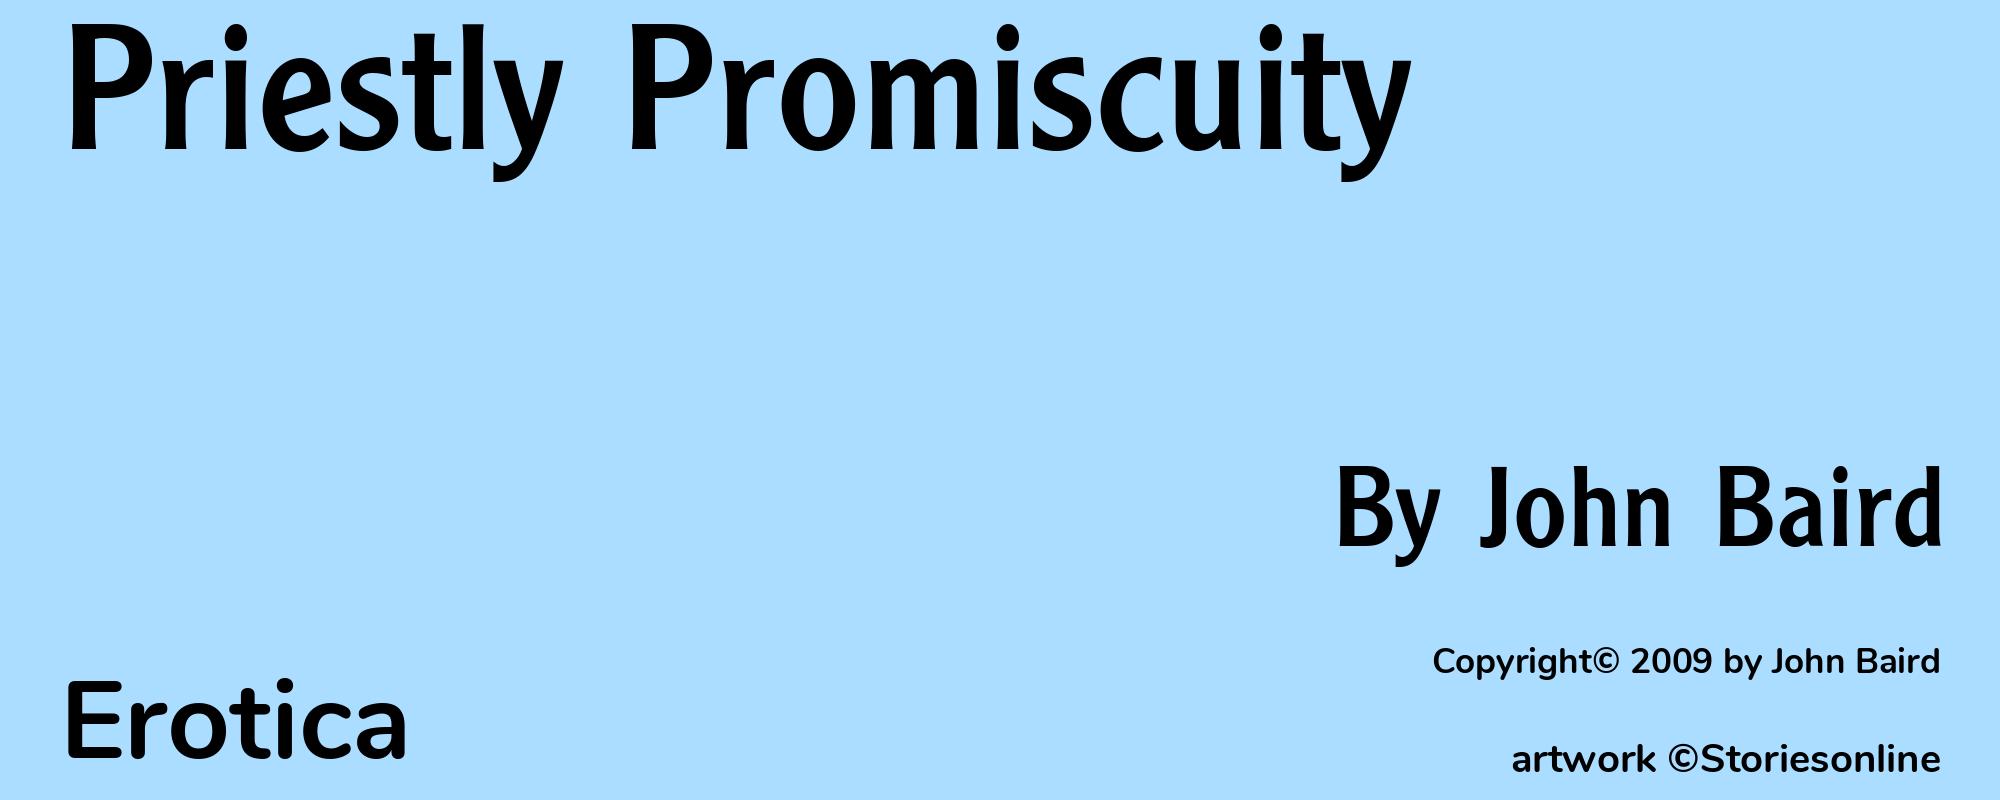 Priestly Promiscuity - Cover